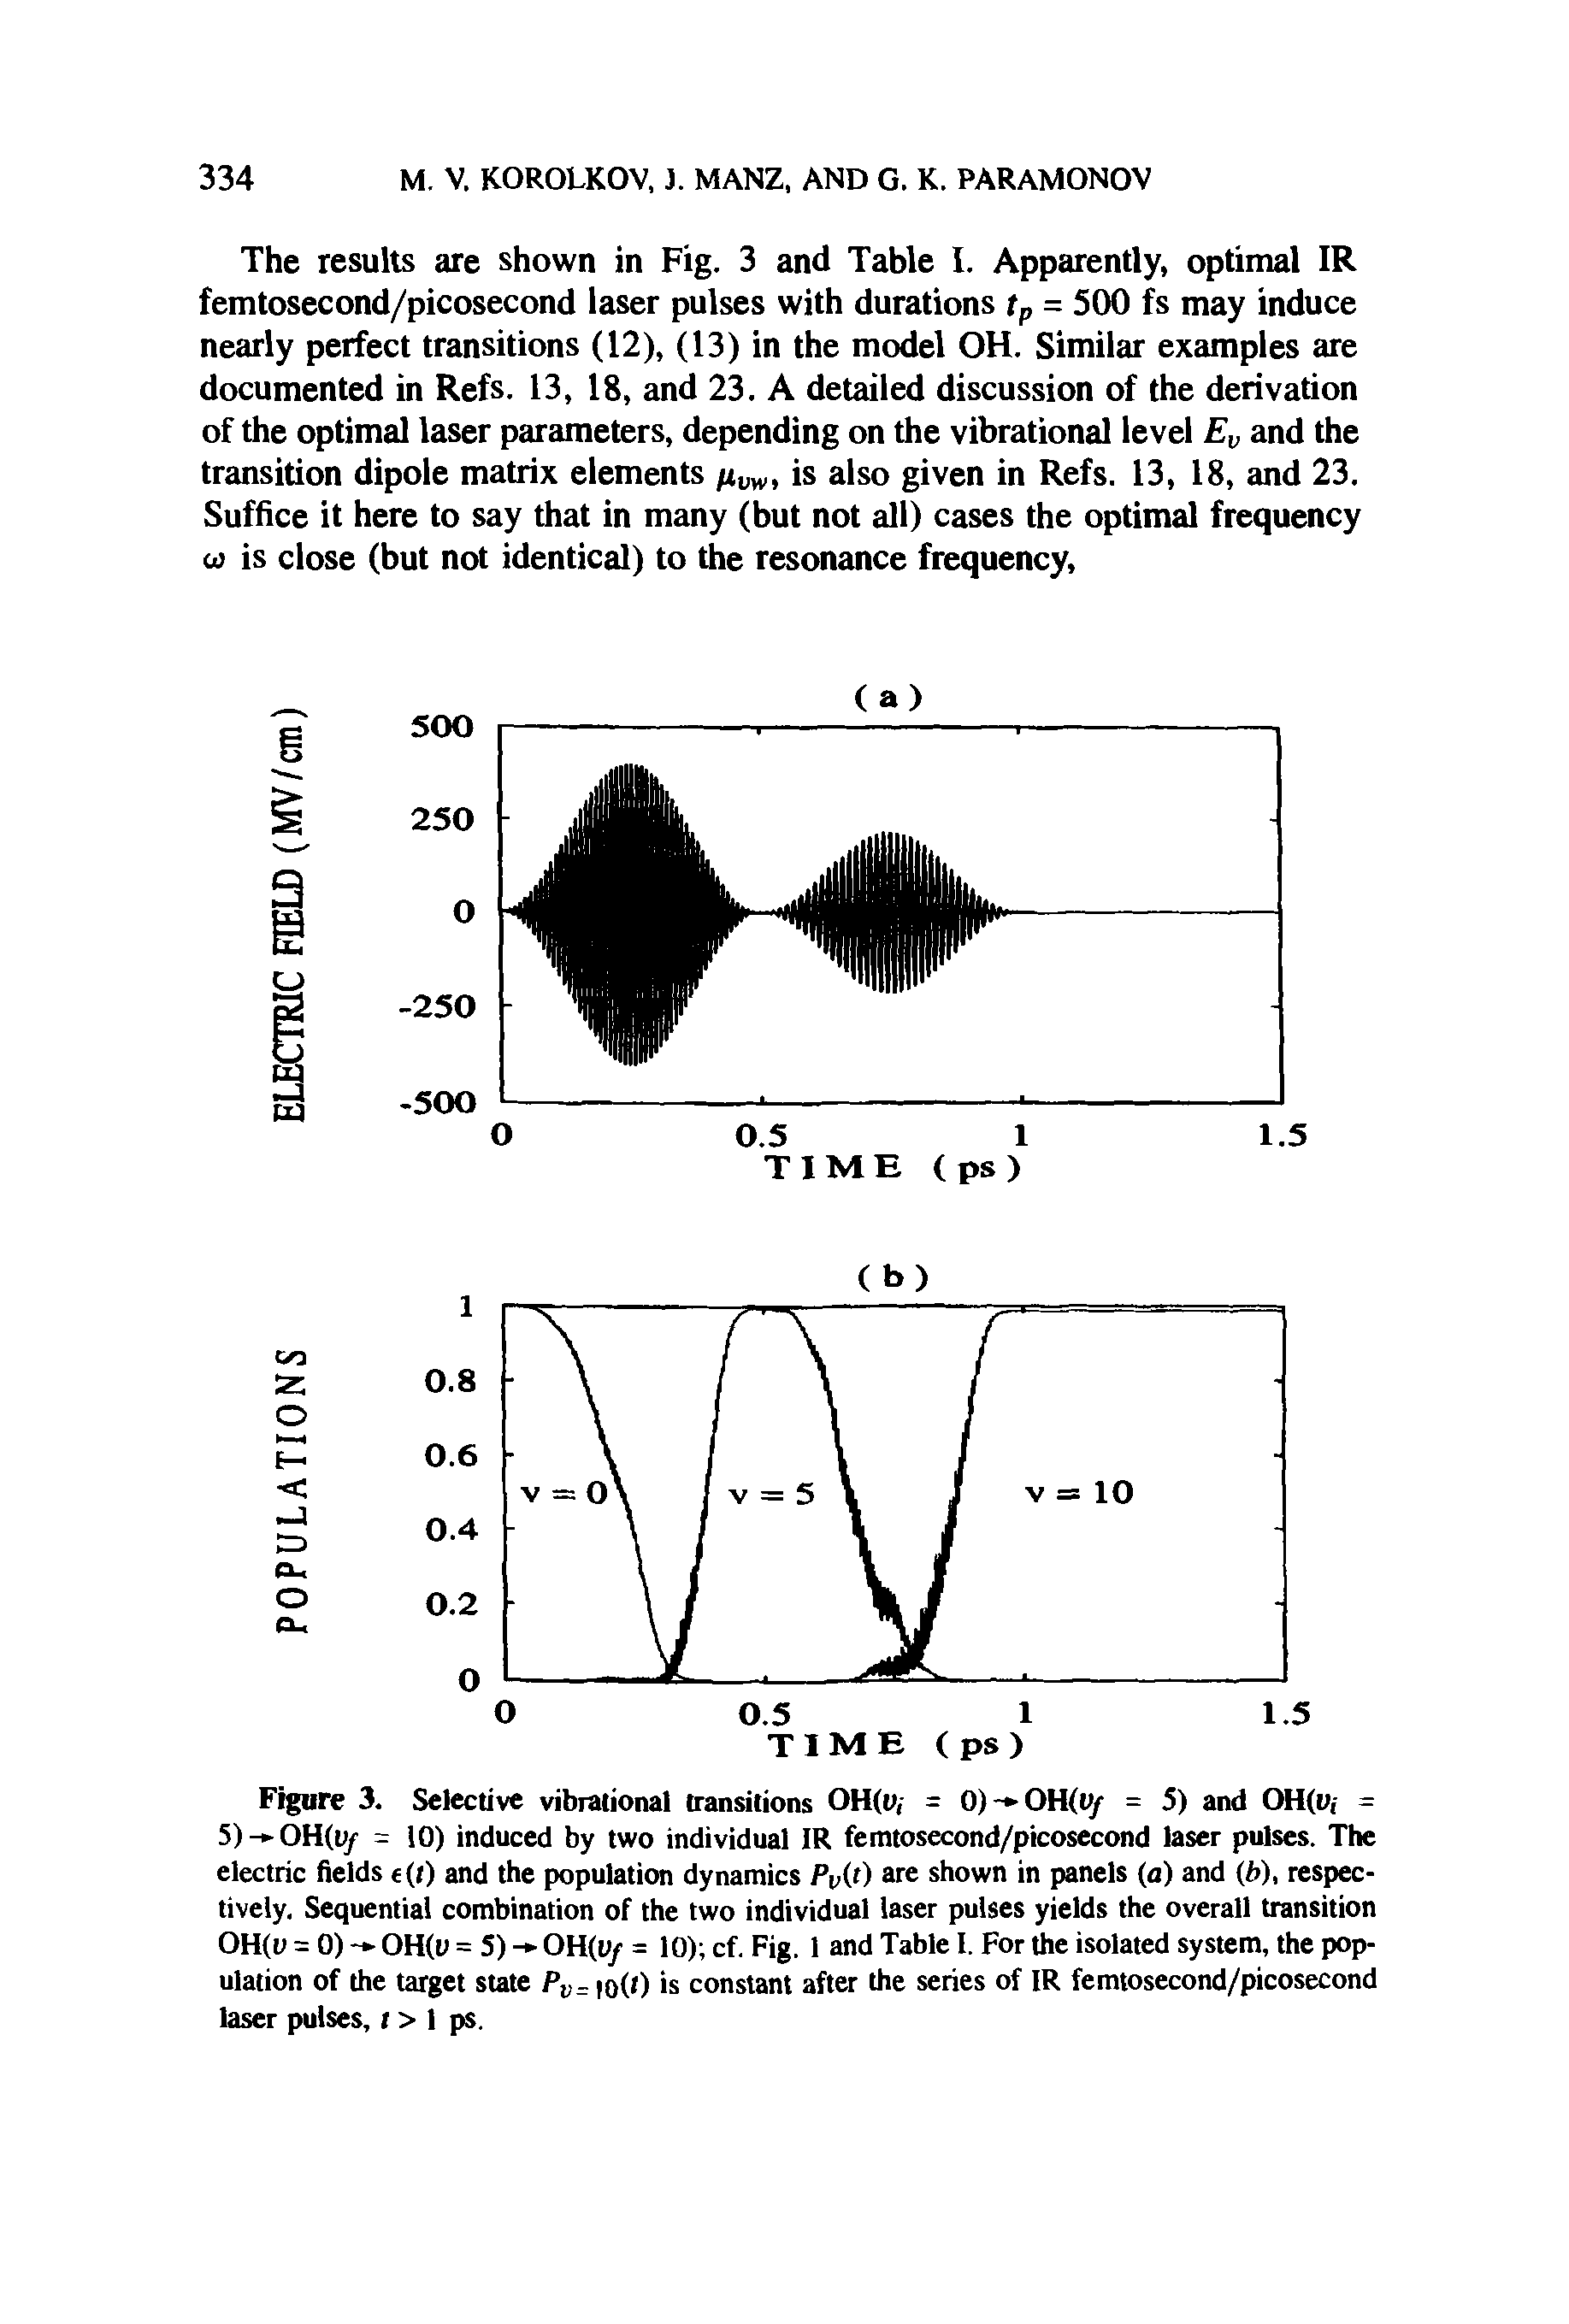 Figure 3. Selective vibrational transitions OH(l>, = 0) - OH(ty = 5) and OH(u, = 5)->-OH(iy = 10) induced by two individual IR femtosecond/picosecond laser pulses. The electric fields c(i) and the population dynamics Pv(t) are shown in panels (a) and (b), respectively. Sequential combination of the two individual laser pulses yields the overall transition OH(u = 0) - OH(u = 5) - OH(u/ = 10) cf. Fig. 1 and Table I. For the isolated system, the population of the target state Pv= fo(t) is constant after the series of IR femtosecond/picosecond laser pulses, i > 1 ps.